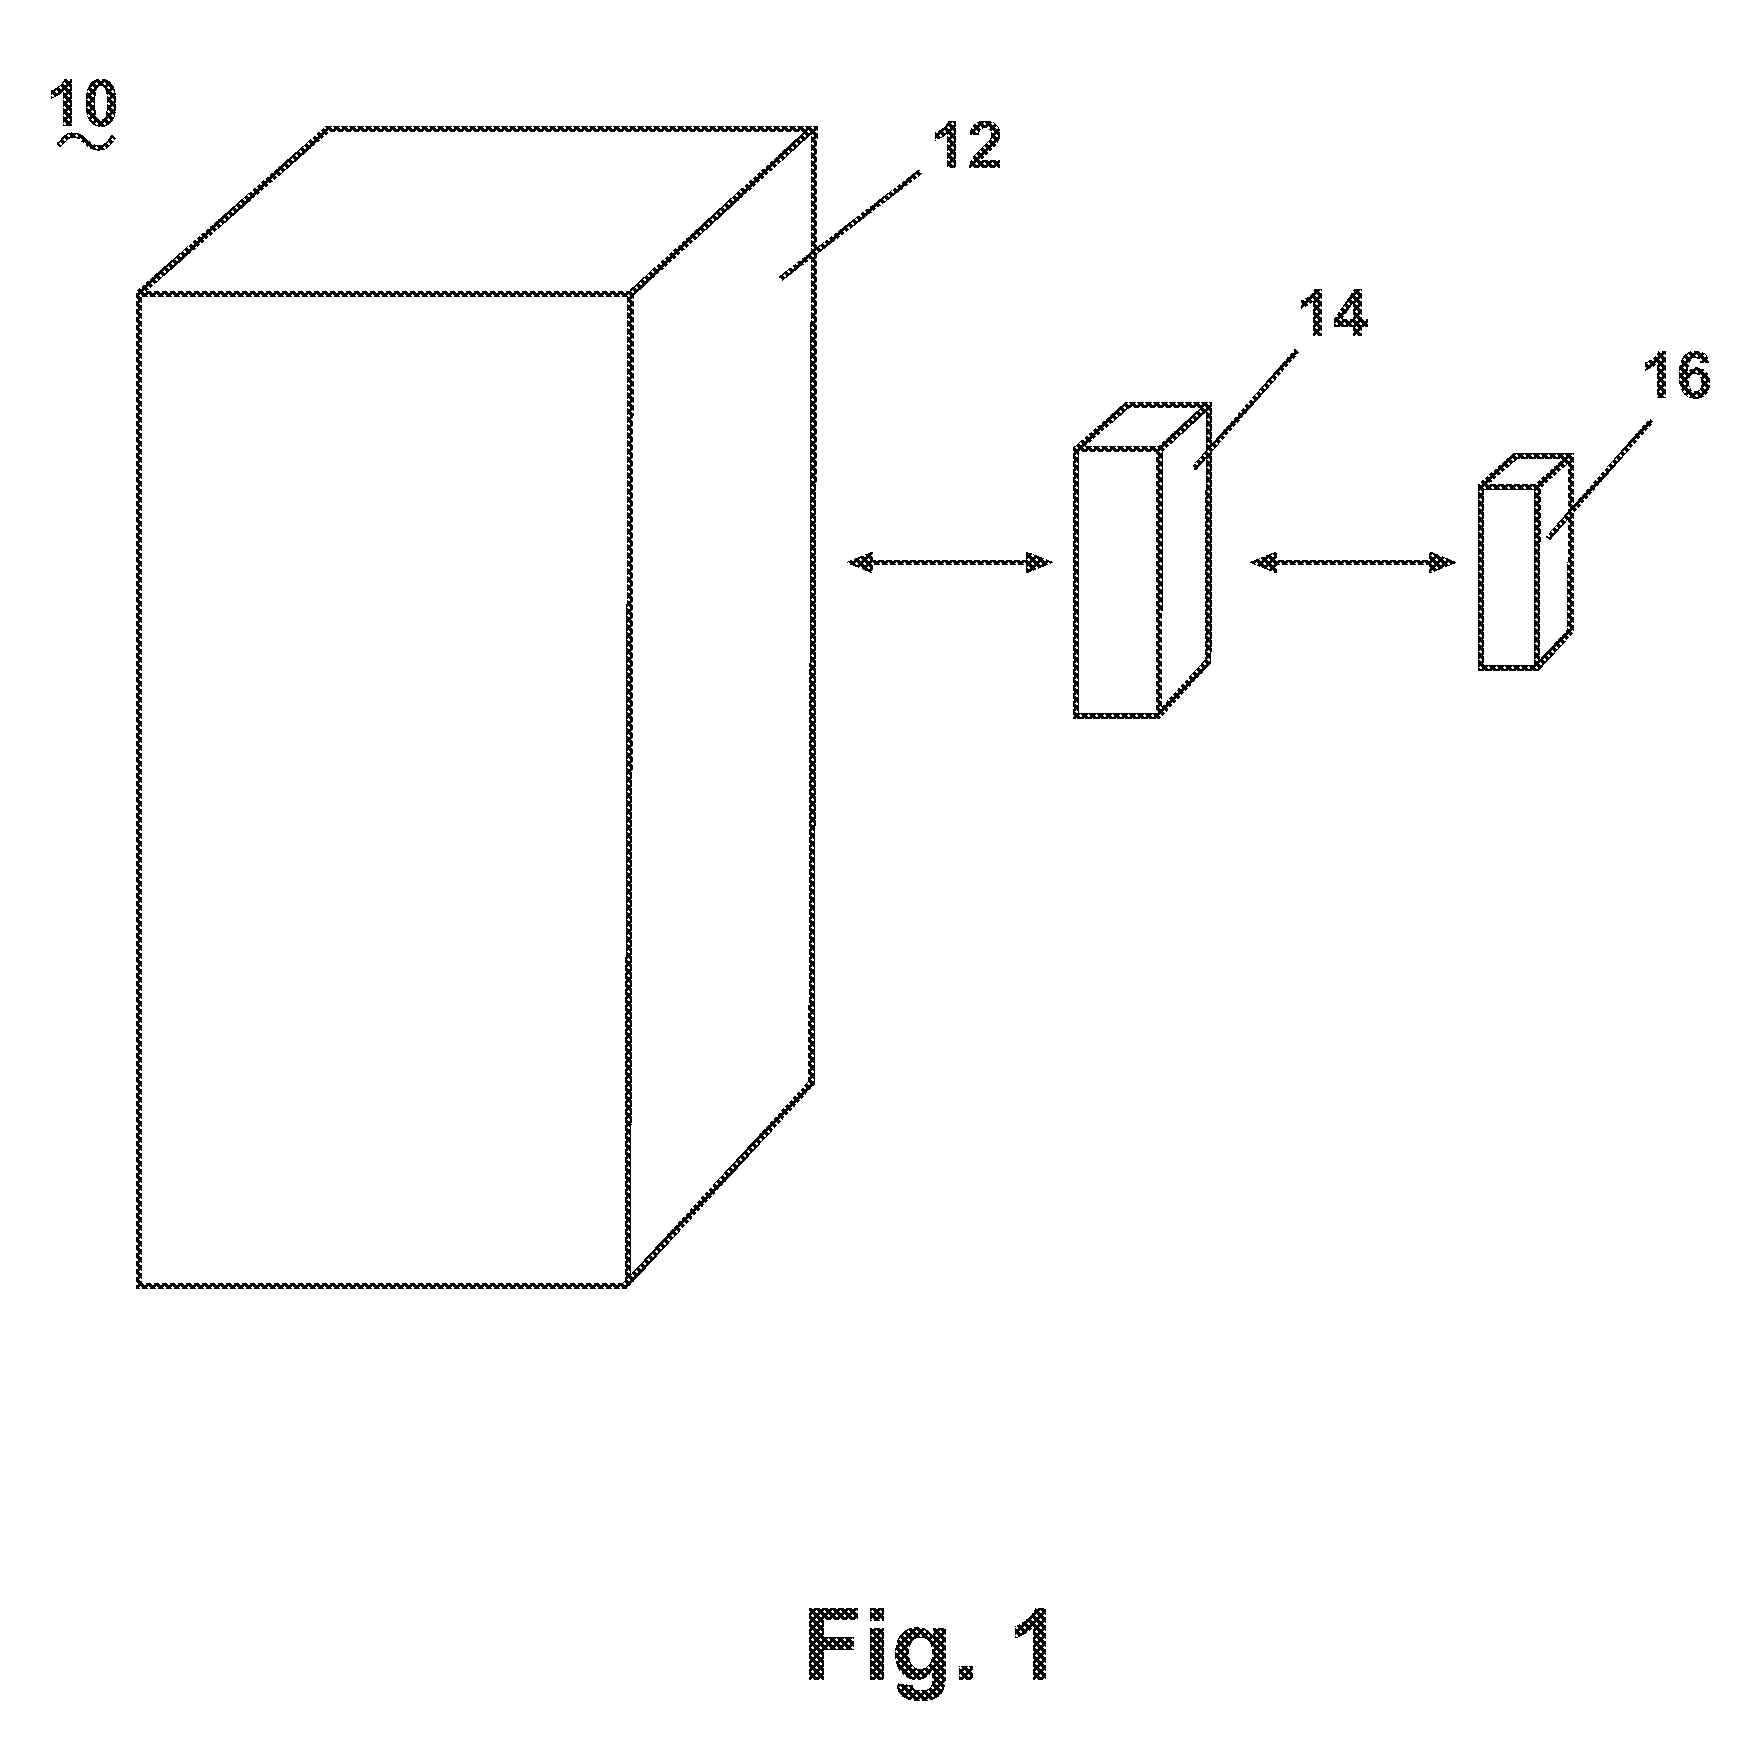 Host and Adapter for Selectively Positioning a Consumer Electronic Display in Visible and Concealed Orientations